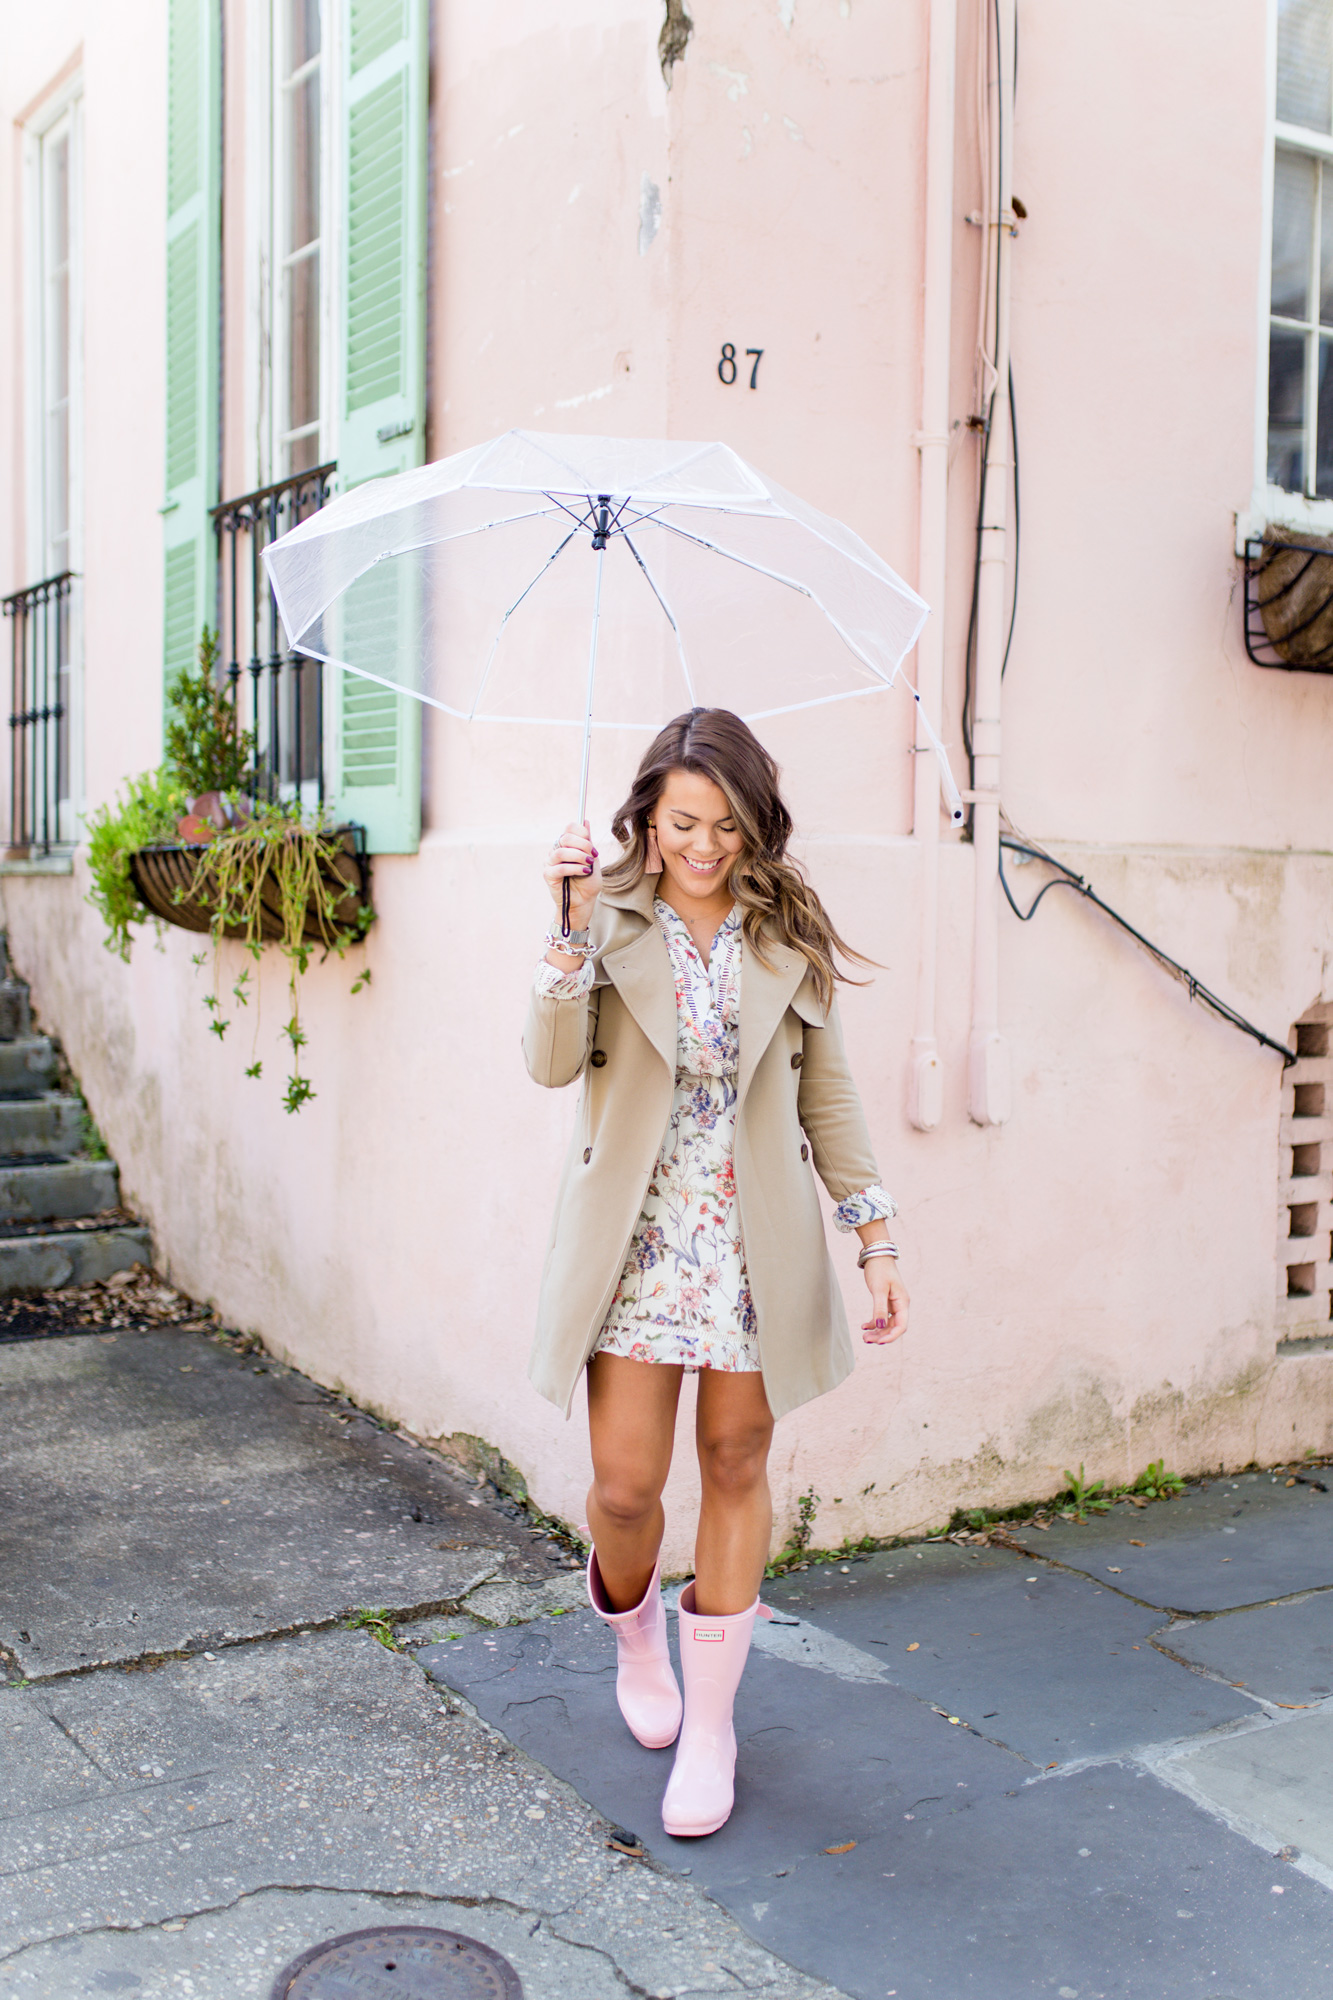 Spring Must Haves / April Showers bring May flowers 